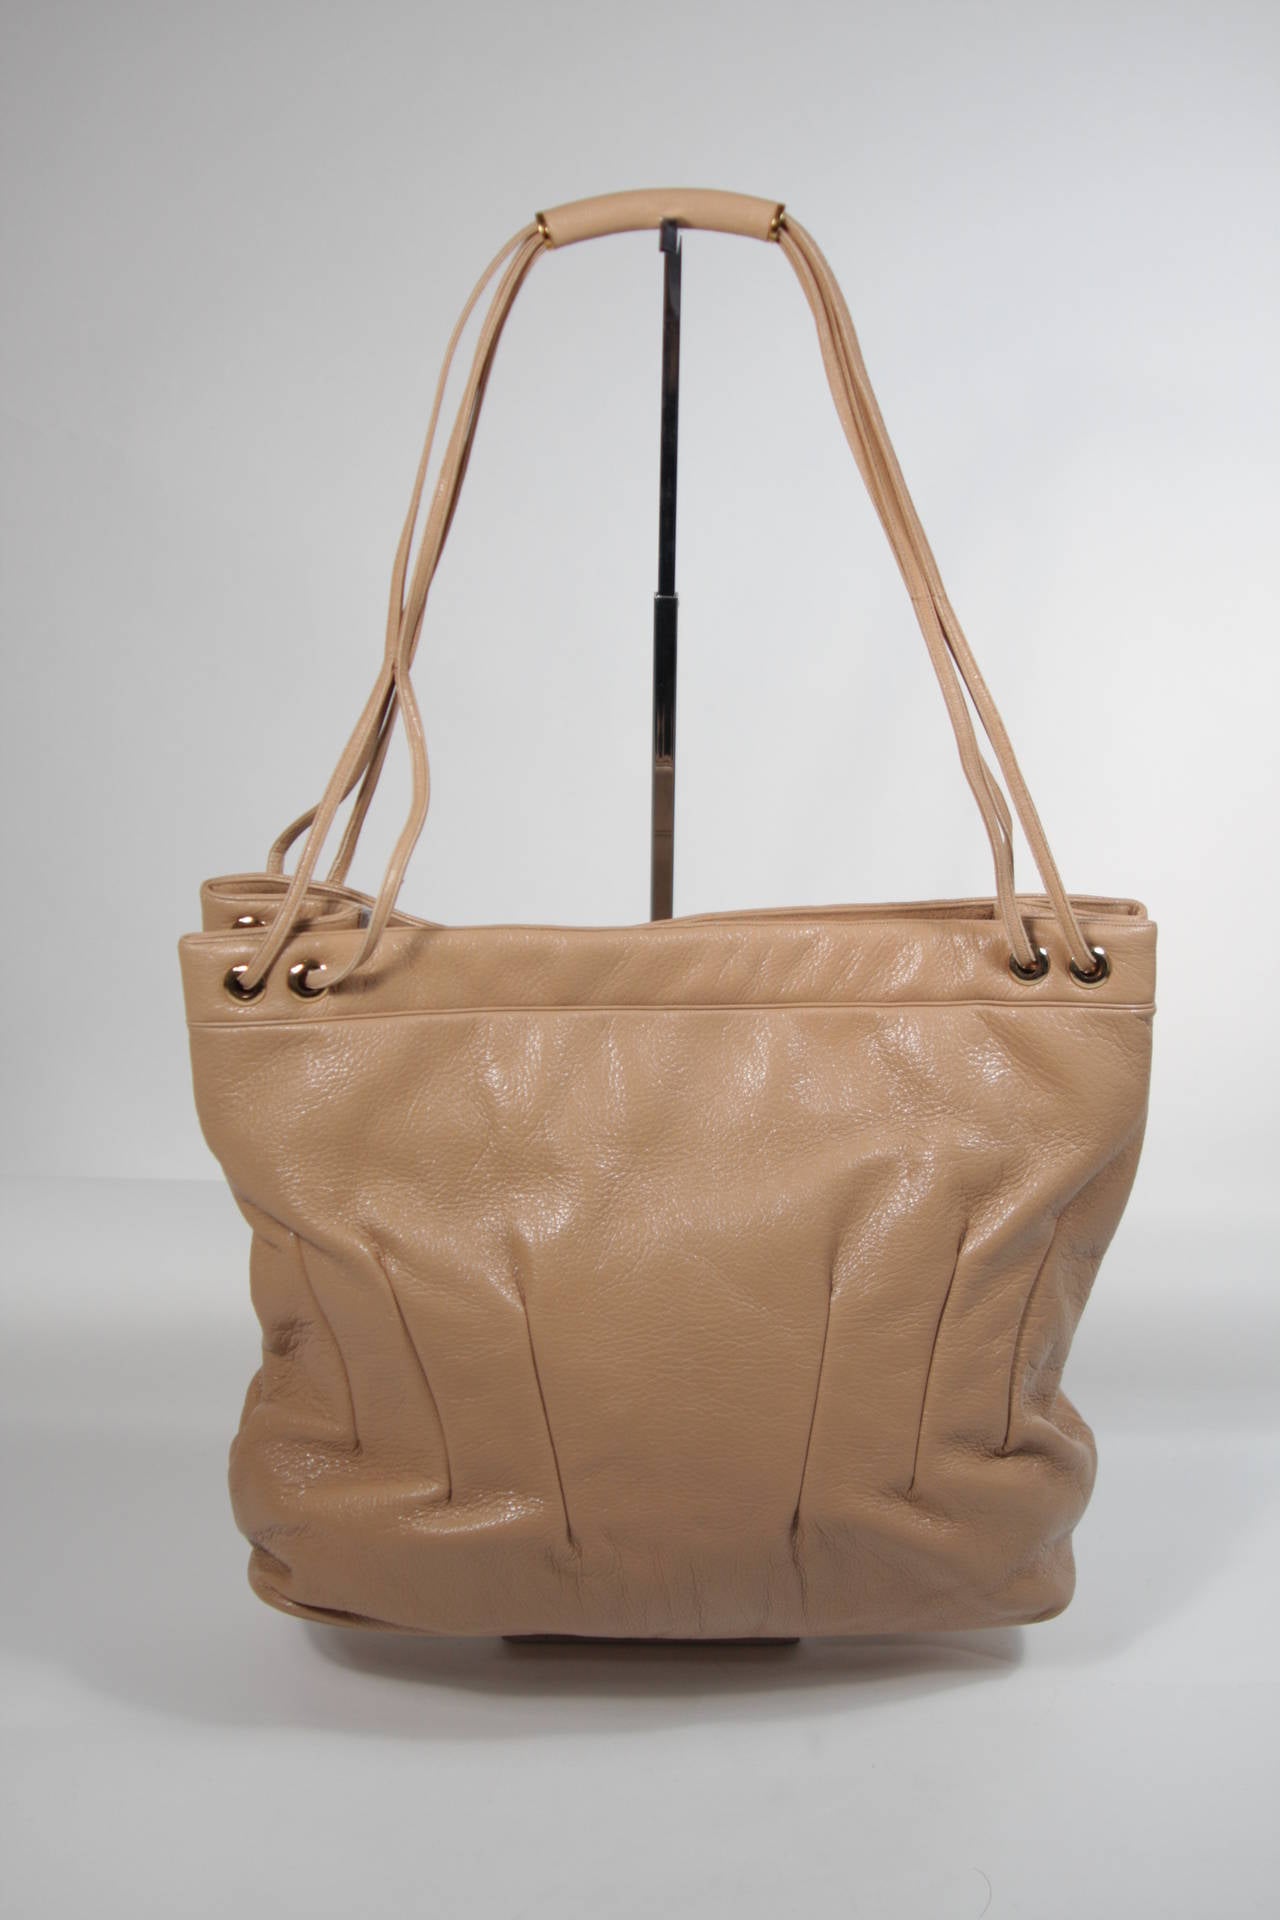 This vintage Judith Leiber is available for viewing at our Beverly Hills Boutique. We offer a large selection of evening gowns and luxury garments.

This handbag is composed of a supple leather with gold hardware. The tote style features double